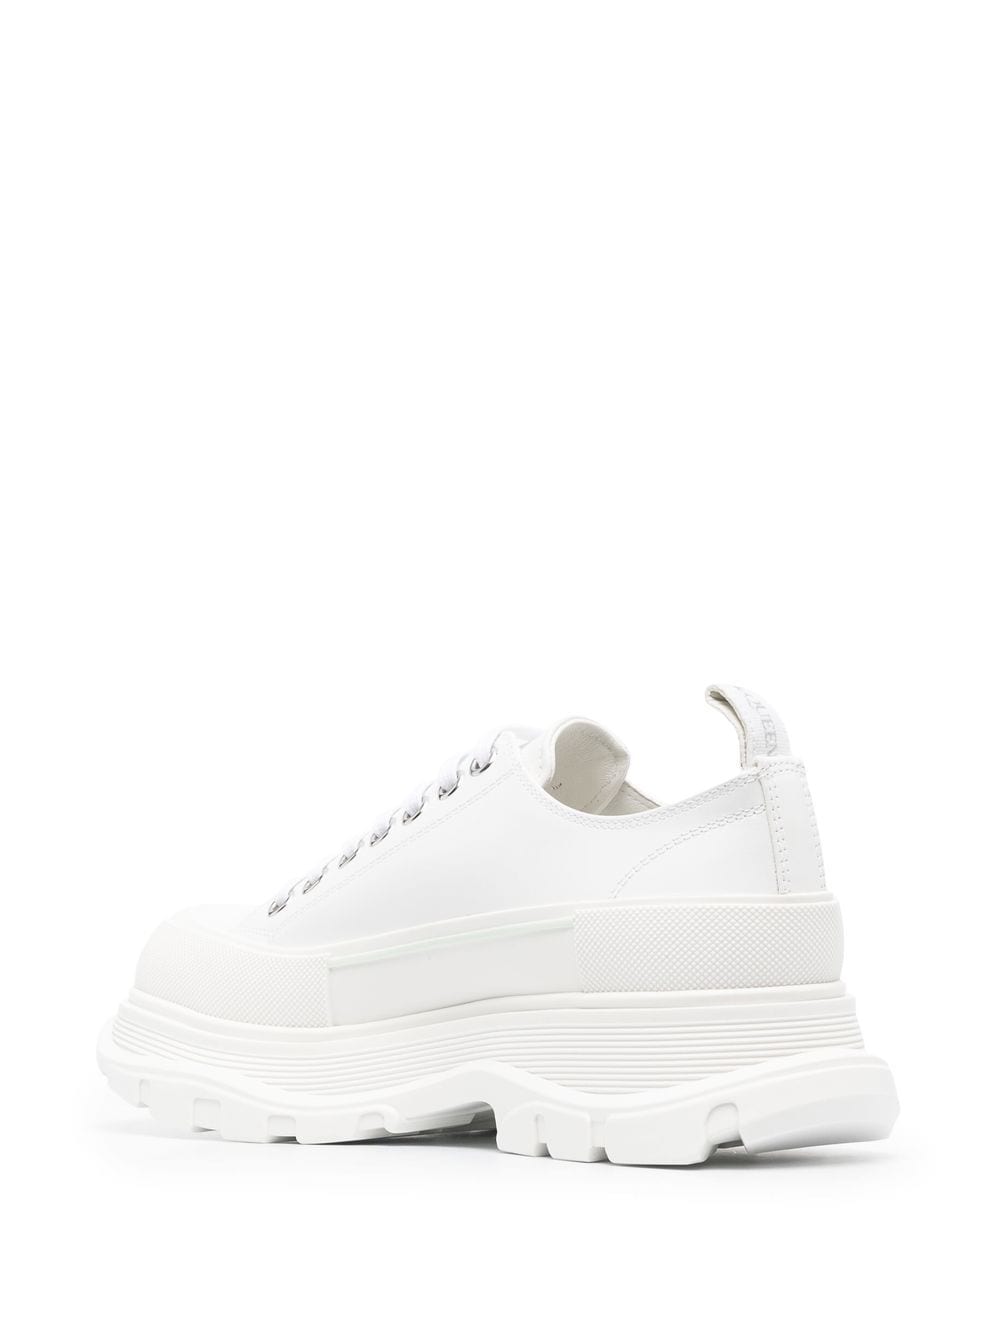 Shop Alexander Mcqueen Sleek Lace-up Fashion Sneakers For Men In White